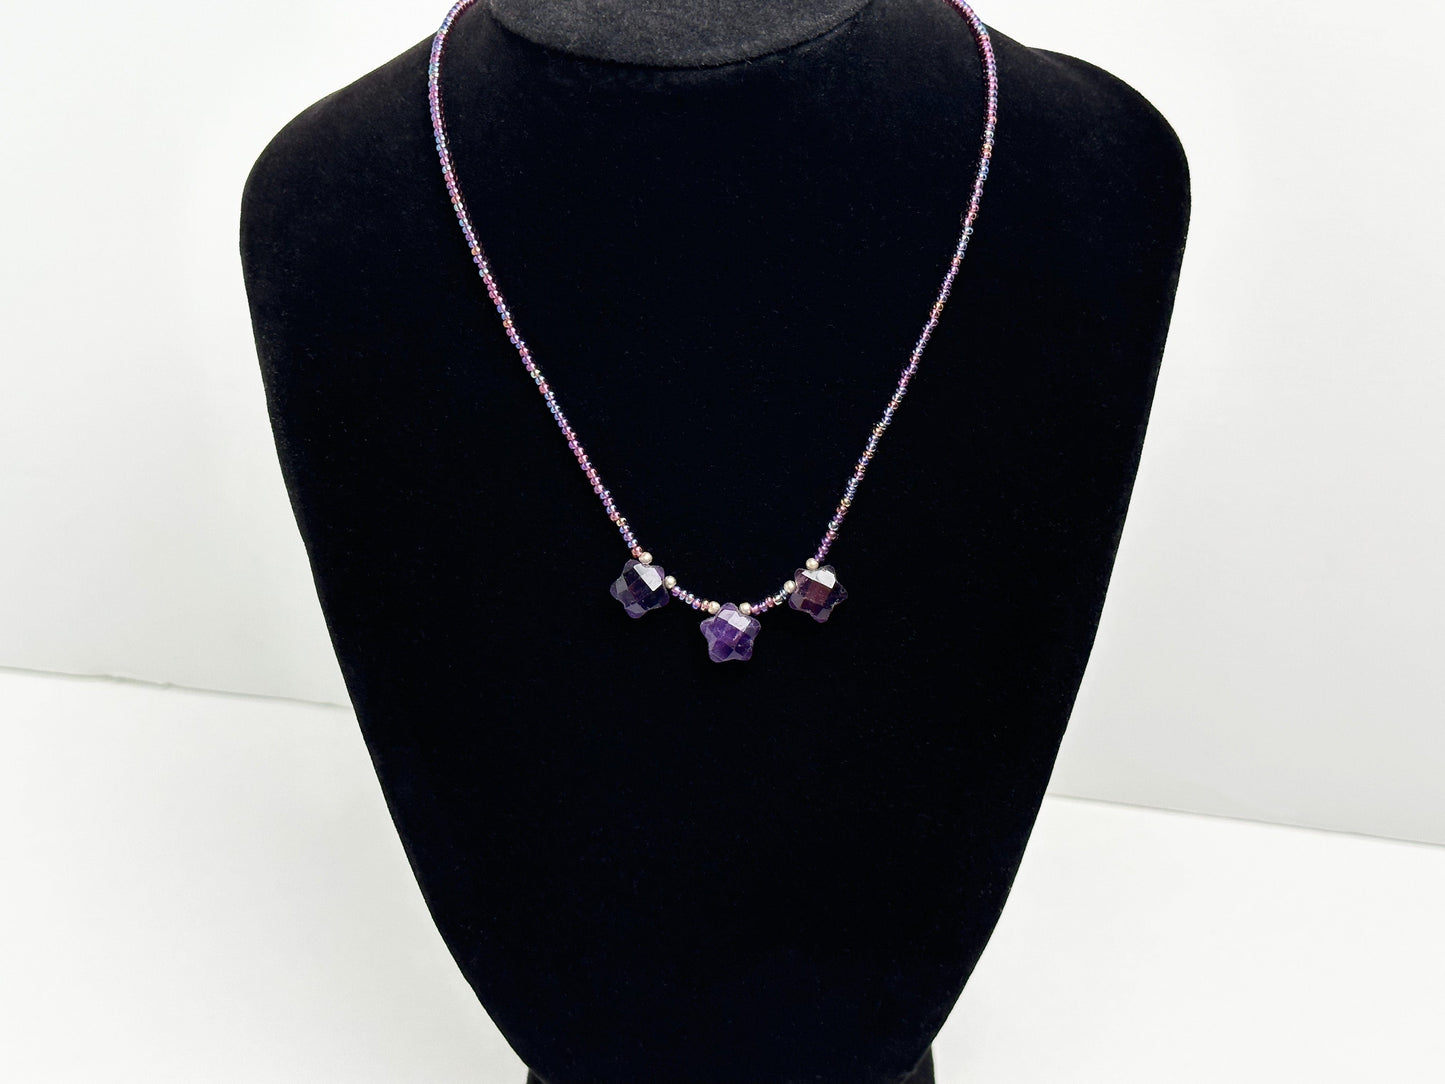 Ted & Bubs Necklaces Amethyst Triple Star Necklace - Crystal Sky Collection